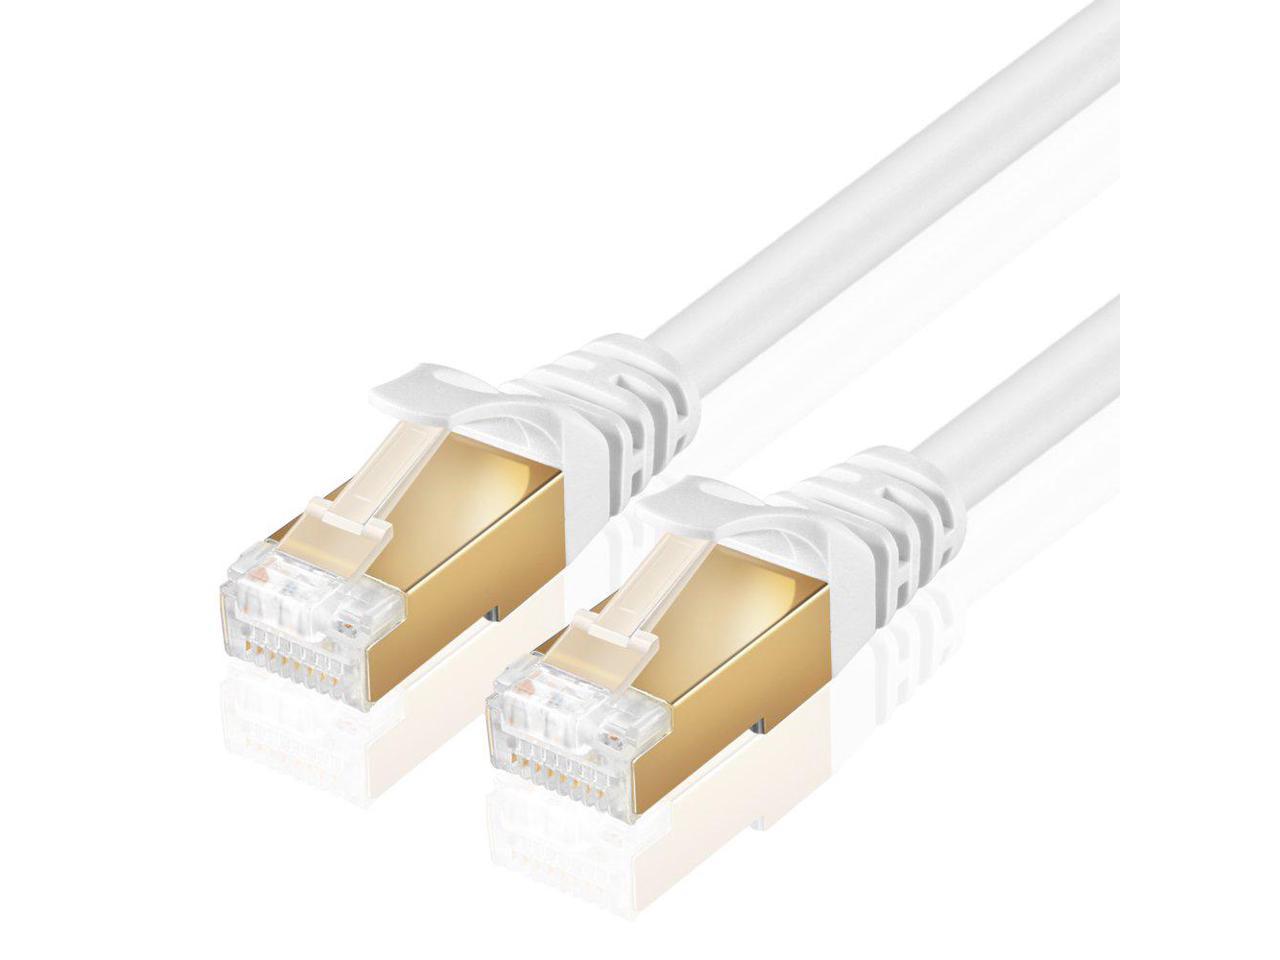 25 Feet TNP Cat6 Ethernet Patch Cable Green - Professional Gold Plated Snagless RJ45 Connector Computer Networking LAN Wire Cord Plug Premium Shielded Twisted Pair 